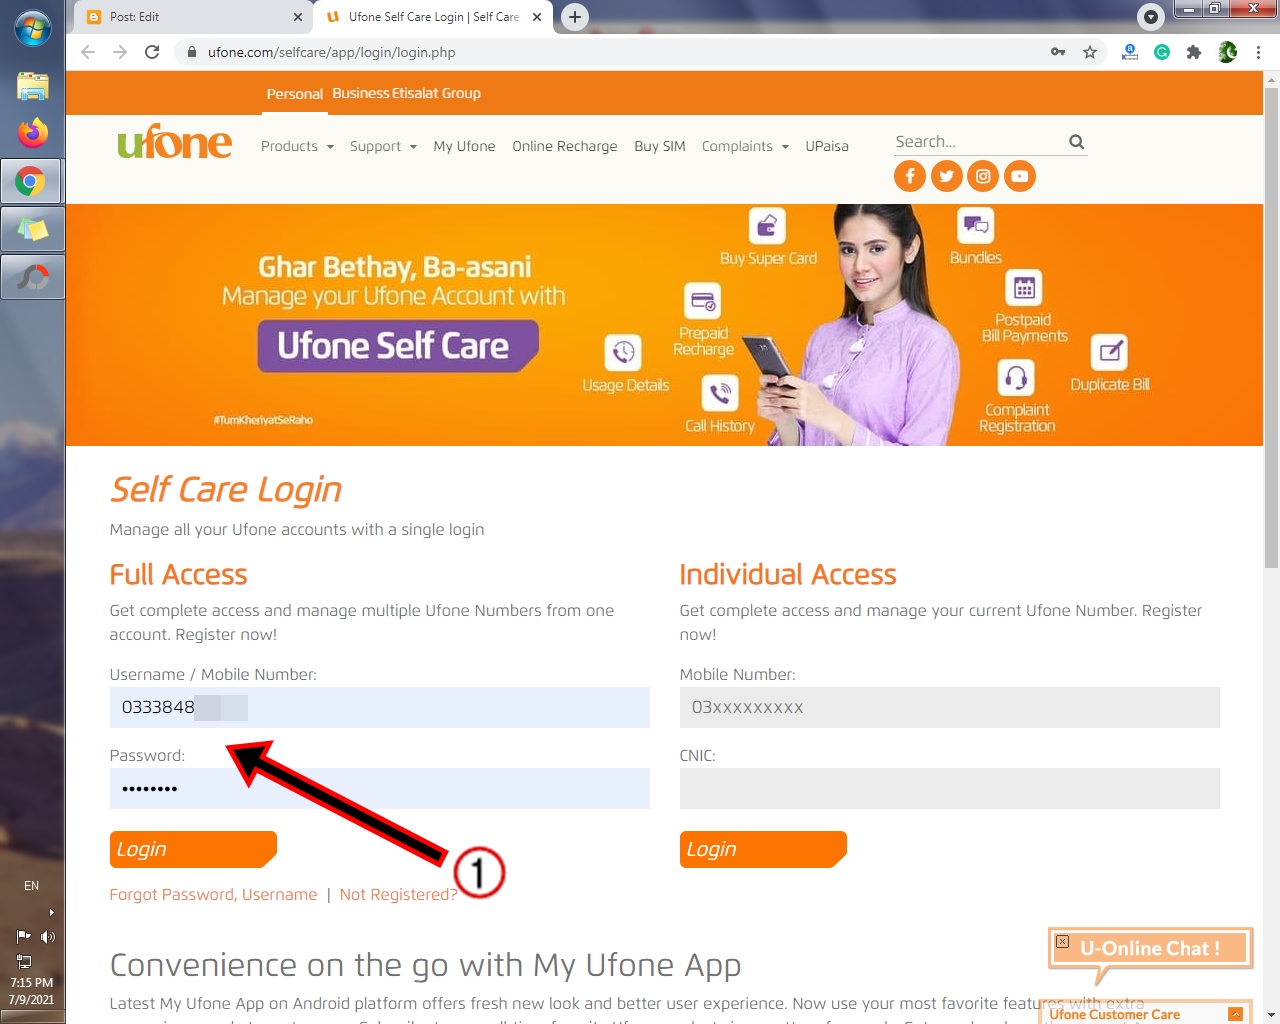 ufone-tax-certificate-how-to-get-ufone-tax-deduction-certificate-online